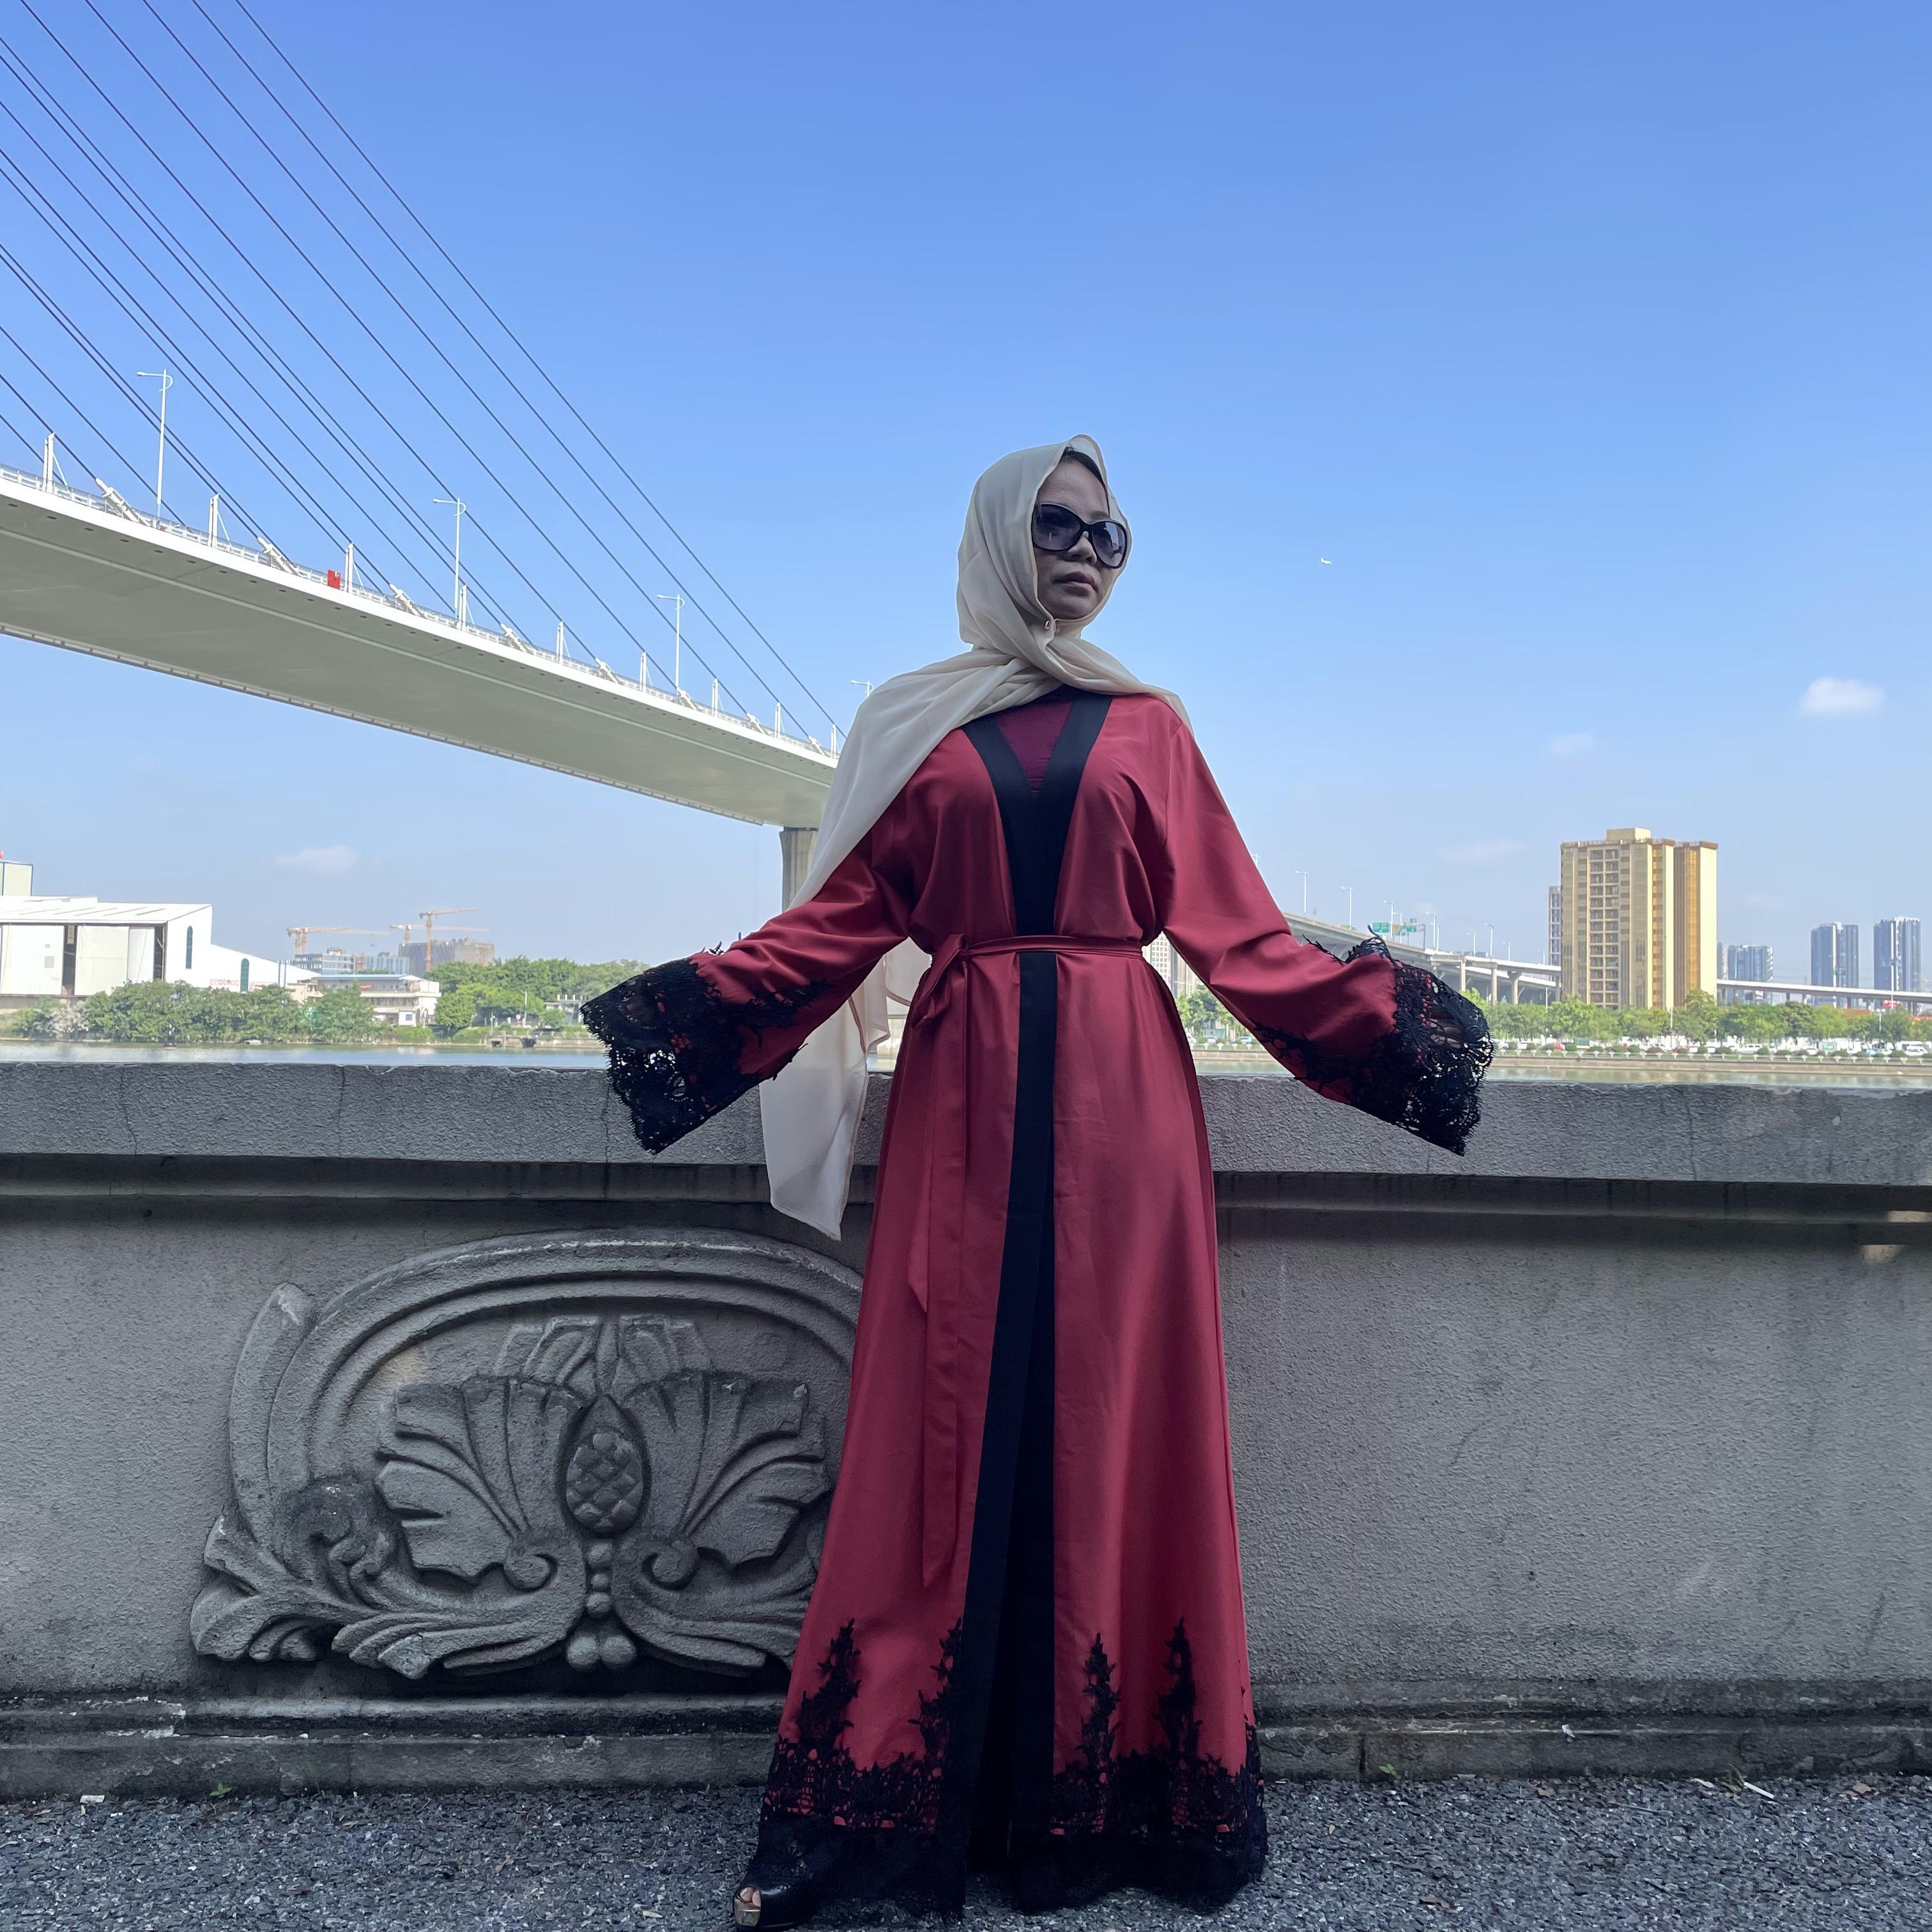 CHAOMENG MUSLIM SHOP1497#Musulman De Mode Ramadan Cardigan Kaftan Turkey Islamic ClothingChaomeng StoreCHAOMENG MUSLIM SHOPCHAOMENG MUSLIM SHOP1497#Musulman De Mode Ramadan Cardigan Kaftan Turkey Islamic Clothing - CHAOMENG MUSLIM SHOPBrand Name:None Department Name:Adult Origin:CN(Origin) Fabric Type:Woven Material:Polyester Decoration:Lace Style:Fashion Item Type:ABAYA Model Number:CM1497     More Colors Lined Dress Show All-match Muslim Abaya, Have many colors, You can match abaya in different colors, This is 100% cotton fabric. This quality is very good, You deserve it, If you want to own this dress,you can click on the picture to own this dress. Size Chart : 1 inch = 2.54 cm S: Bust 106 cm,Sleeve 63 cm,Length 140 cm M: Bust 112 cm,Sleeve 63 cm,Length 140 cm L: Bust 118 cm,Sleeve 63 cm,Length 145 cm XL: Bust 124 cm,Sleeve 63 cm,Length 145 cm Model show Fabric content：polyester 95% spandex 5%   - CHAOMENG MUSLIM SHOP1497#Musulman De Mode Ramadan Cardigan Kaftan Turkey Islamic ClothingBrand Name:None Department Name:Adult Origin:CN(Origin) Fabric Type:Woven Material:Polyester Decoration:Lace Style:Fashion Item Type:ABAYA Model Number:CM1497     More Colors Lined Dress Show All-match Muslim Abaya, Have many colors, You can match abaya in different colors, This is 100% cotton fabric. This quality is very good, You deserve it, If you want to own this dress,you can click on the picture to own this dress. Size Chart : 1 inch = 2.54 cm S: Bust 106 cm,Sleeve 63 cm,Length 140 cm M: Bust 112 cm,Sleeve 63 cm,Length 140 cm L: Bust 118 cm,Sleeve 63 cm,Length 145 cm XL: Bust 124 cm,Sleeve 63 cm,Length 145 cm Model show Fabric content：polyester 95% spandex 5%  26.9Chaomeng StoreBrand Name:None Department Name:Adult Origin:CN(Origin) Fabric Type:Woven Material:Polyester Decoration:Lace Style:Fashion Item Type:ABAYA Model Number:CM1497     More Colors Lined Dress Show All-match Muslim Abaya, Have many colors, You can match abaya in different colors, This is 100% cotton fabric. This quality is very good, You deserve it, If you want to own this dress,you can click on the picture to own this dress. Size Chart : 1 inch = 2.54 cm S: Bust 106 cm,Sleeve 63 cm,Length 140 cm M: Bust 112 cm,Sleeve 63 cm,Length 140 cm L: Bust 118 cm,Sleeve 63 cm,Length 145 cm XL: Bust 124 cm,Sleeve 63 cm,Length 145 cm Model show Fabric content：polyester 95% spandex 5%   - CHAOMENG MUSLIM SHOP1497#Musulman De Mode Ramadan Cardigan Kaftan Turkey Islamic ClothingBrand Name:None Department Name:Adult Origin:CN(Origin) Fabric Type:Woven Material:Polyester Decoration:Lace Style:Fashion Item Type:ABAYA Model Number:CM1497     More Colors Lined Dress Show All-match Muslim Abaya, Have many colors, You can match abaya in different colors, This is 100% cotton fabric. This quality is very good, You deserve it, If you want to own this dress,you can click on the picture to own this dress. Size Chart : 1 inch = 2.54 cm S: Bust 106 cm,Sleeve 63 cm,Length 140 cm M: Bust 112 cm,Sleeve 63 cm,Length 140 cm L: Bust 118 cm,Sleeve 63 cm,Length 145 cm XL: Bust 124 cm,Sleeve 63 cm,Length 145 cm Model show Fabric content：polyester 95% spandex 5%  26.9Chaomeng Store